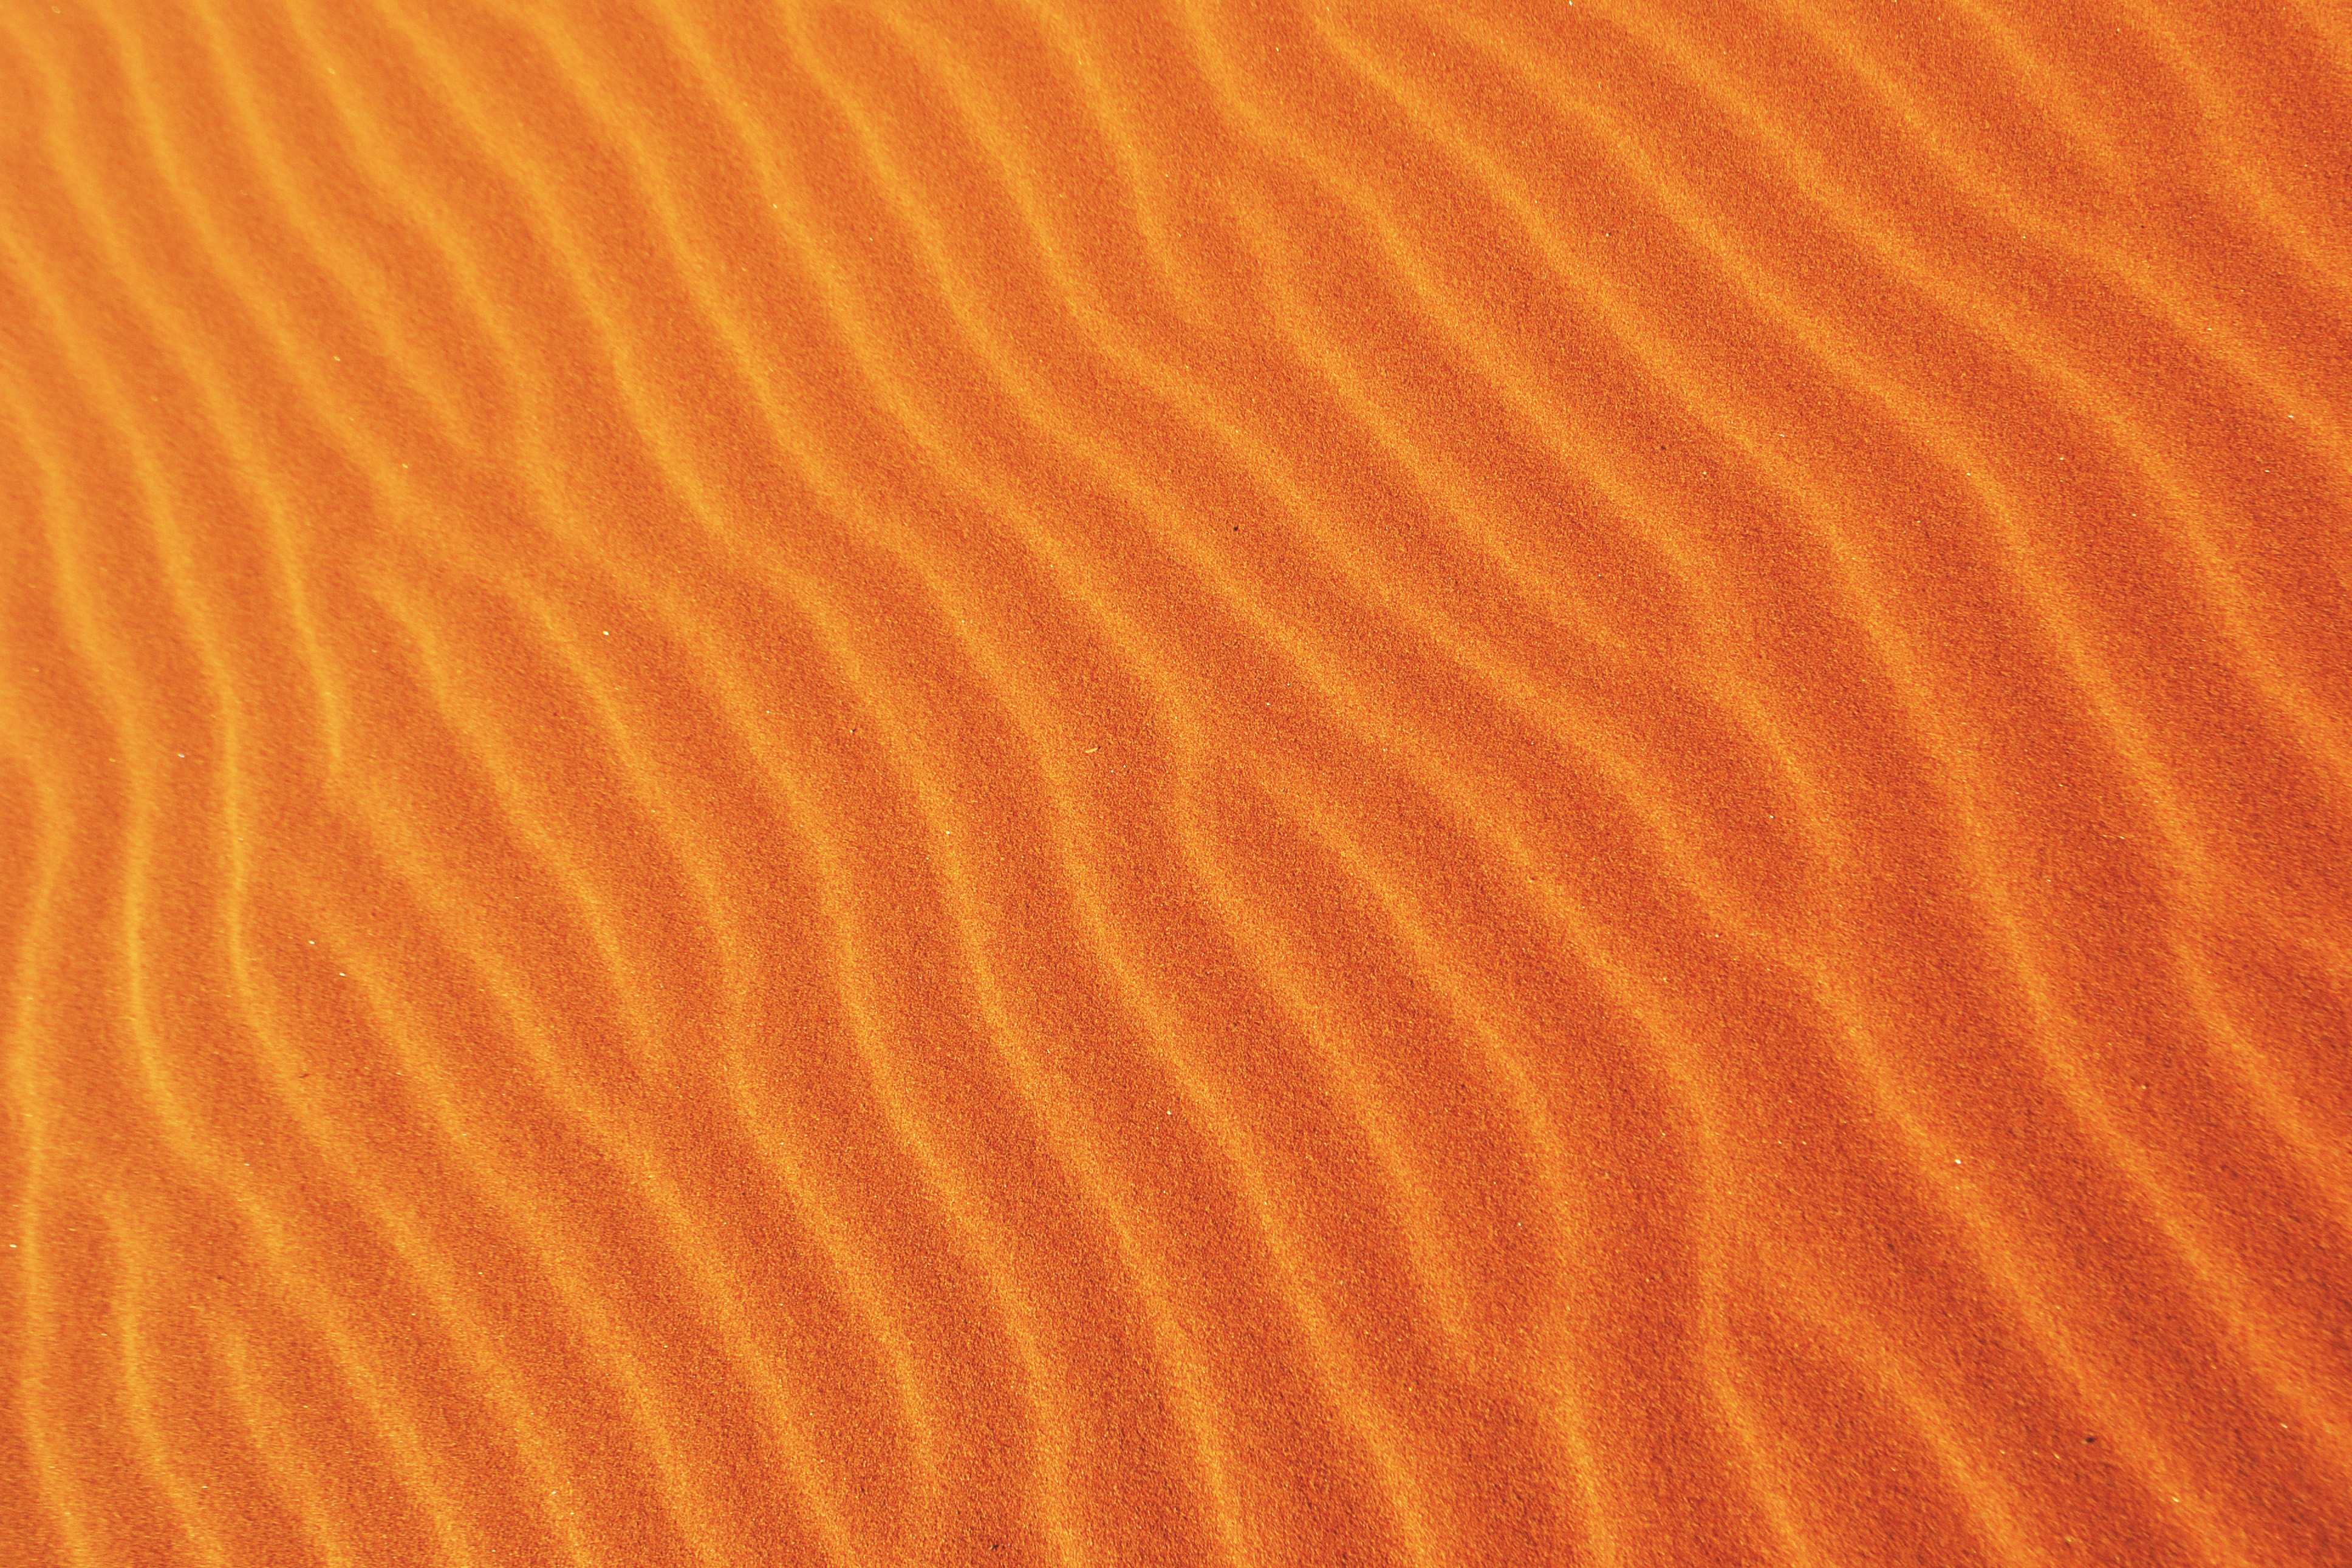 107172 free download Orange wallpapers for phone, sand, textures, texture, relief Orange images and screensavers for mobile